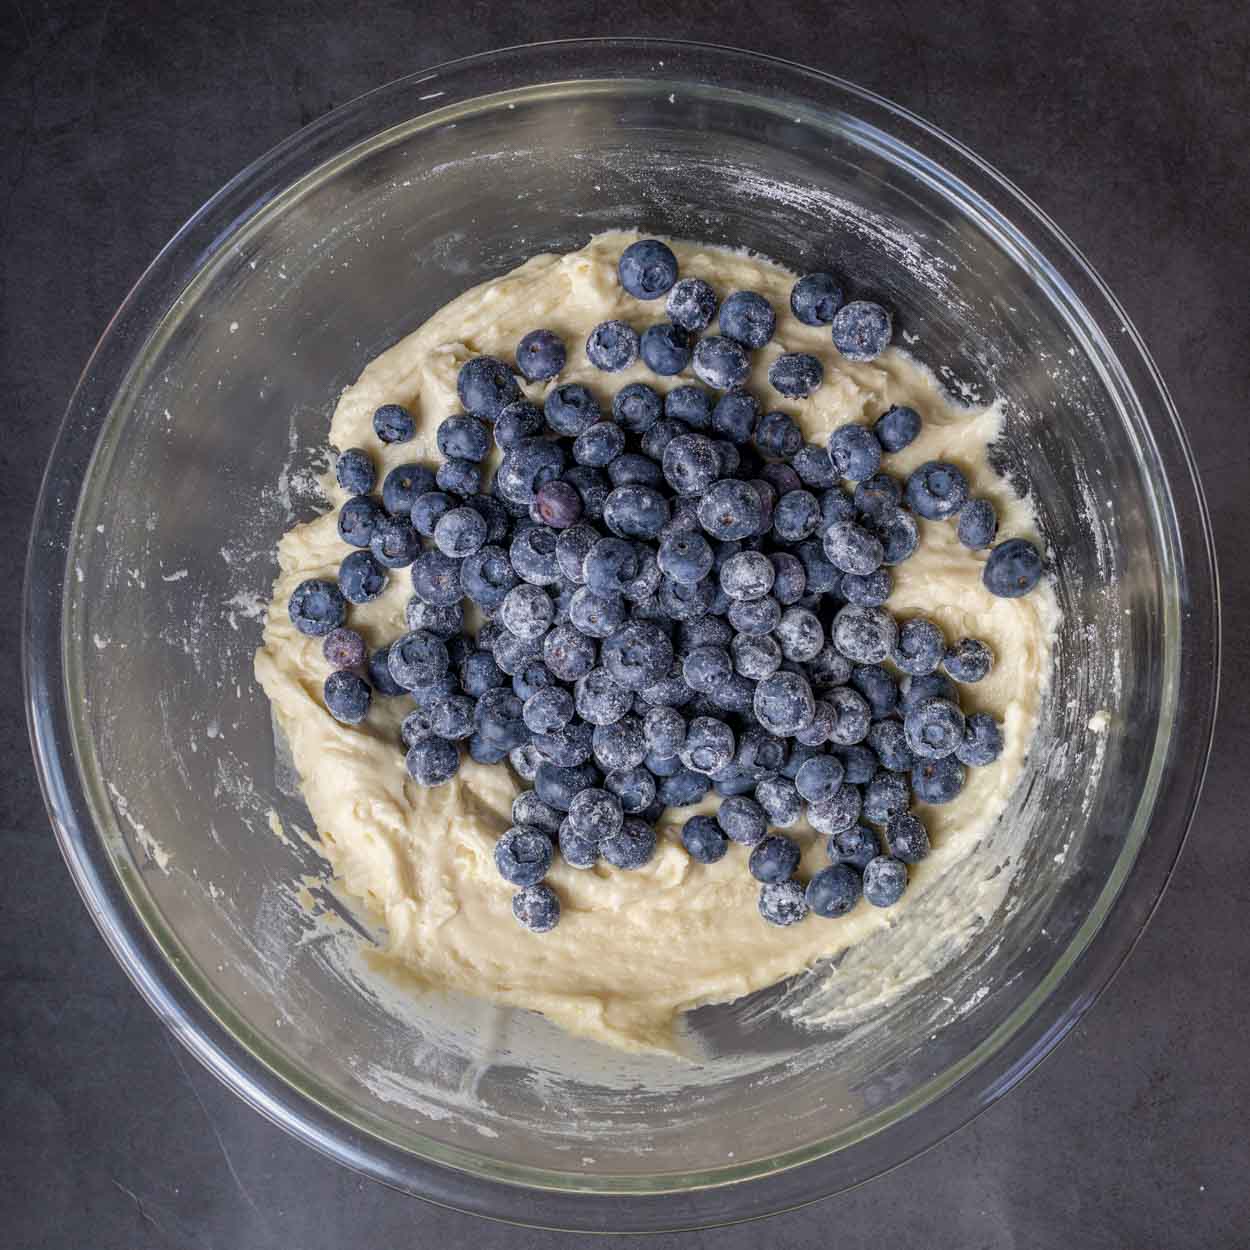 The glass bowl of batter with blueberries.